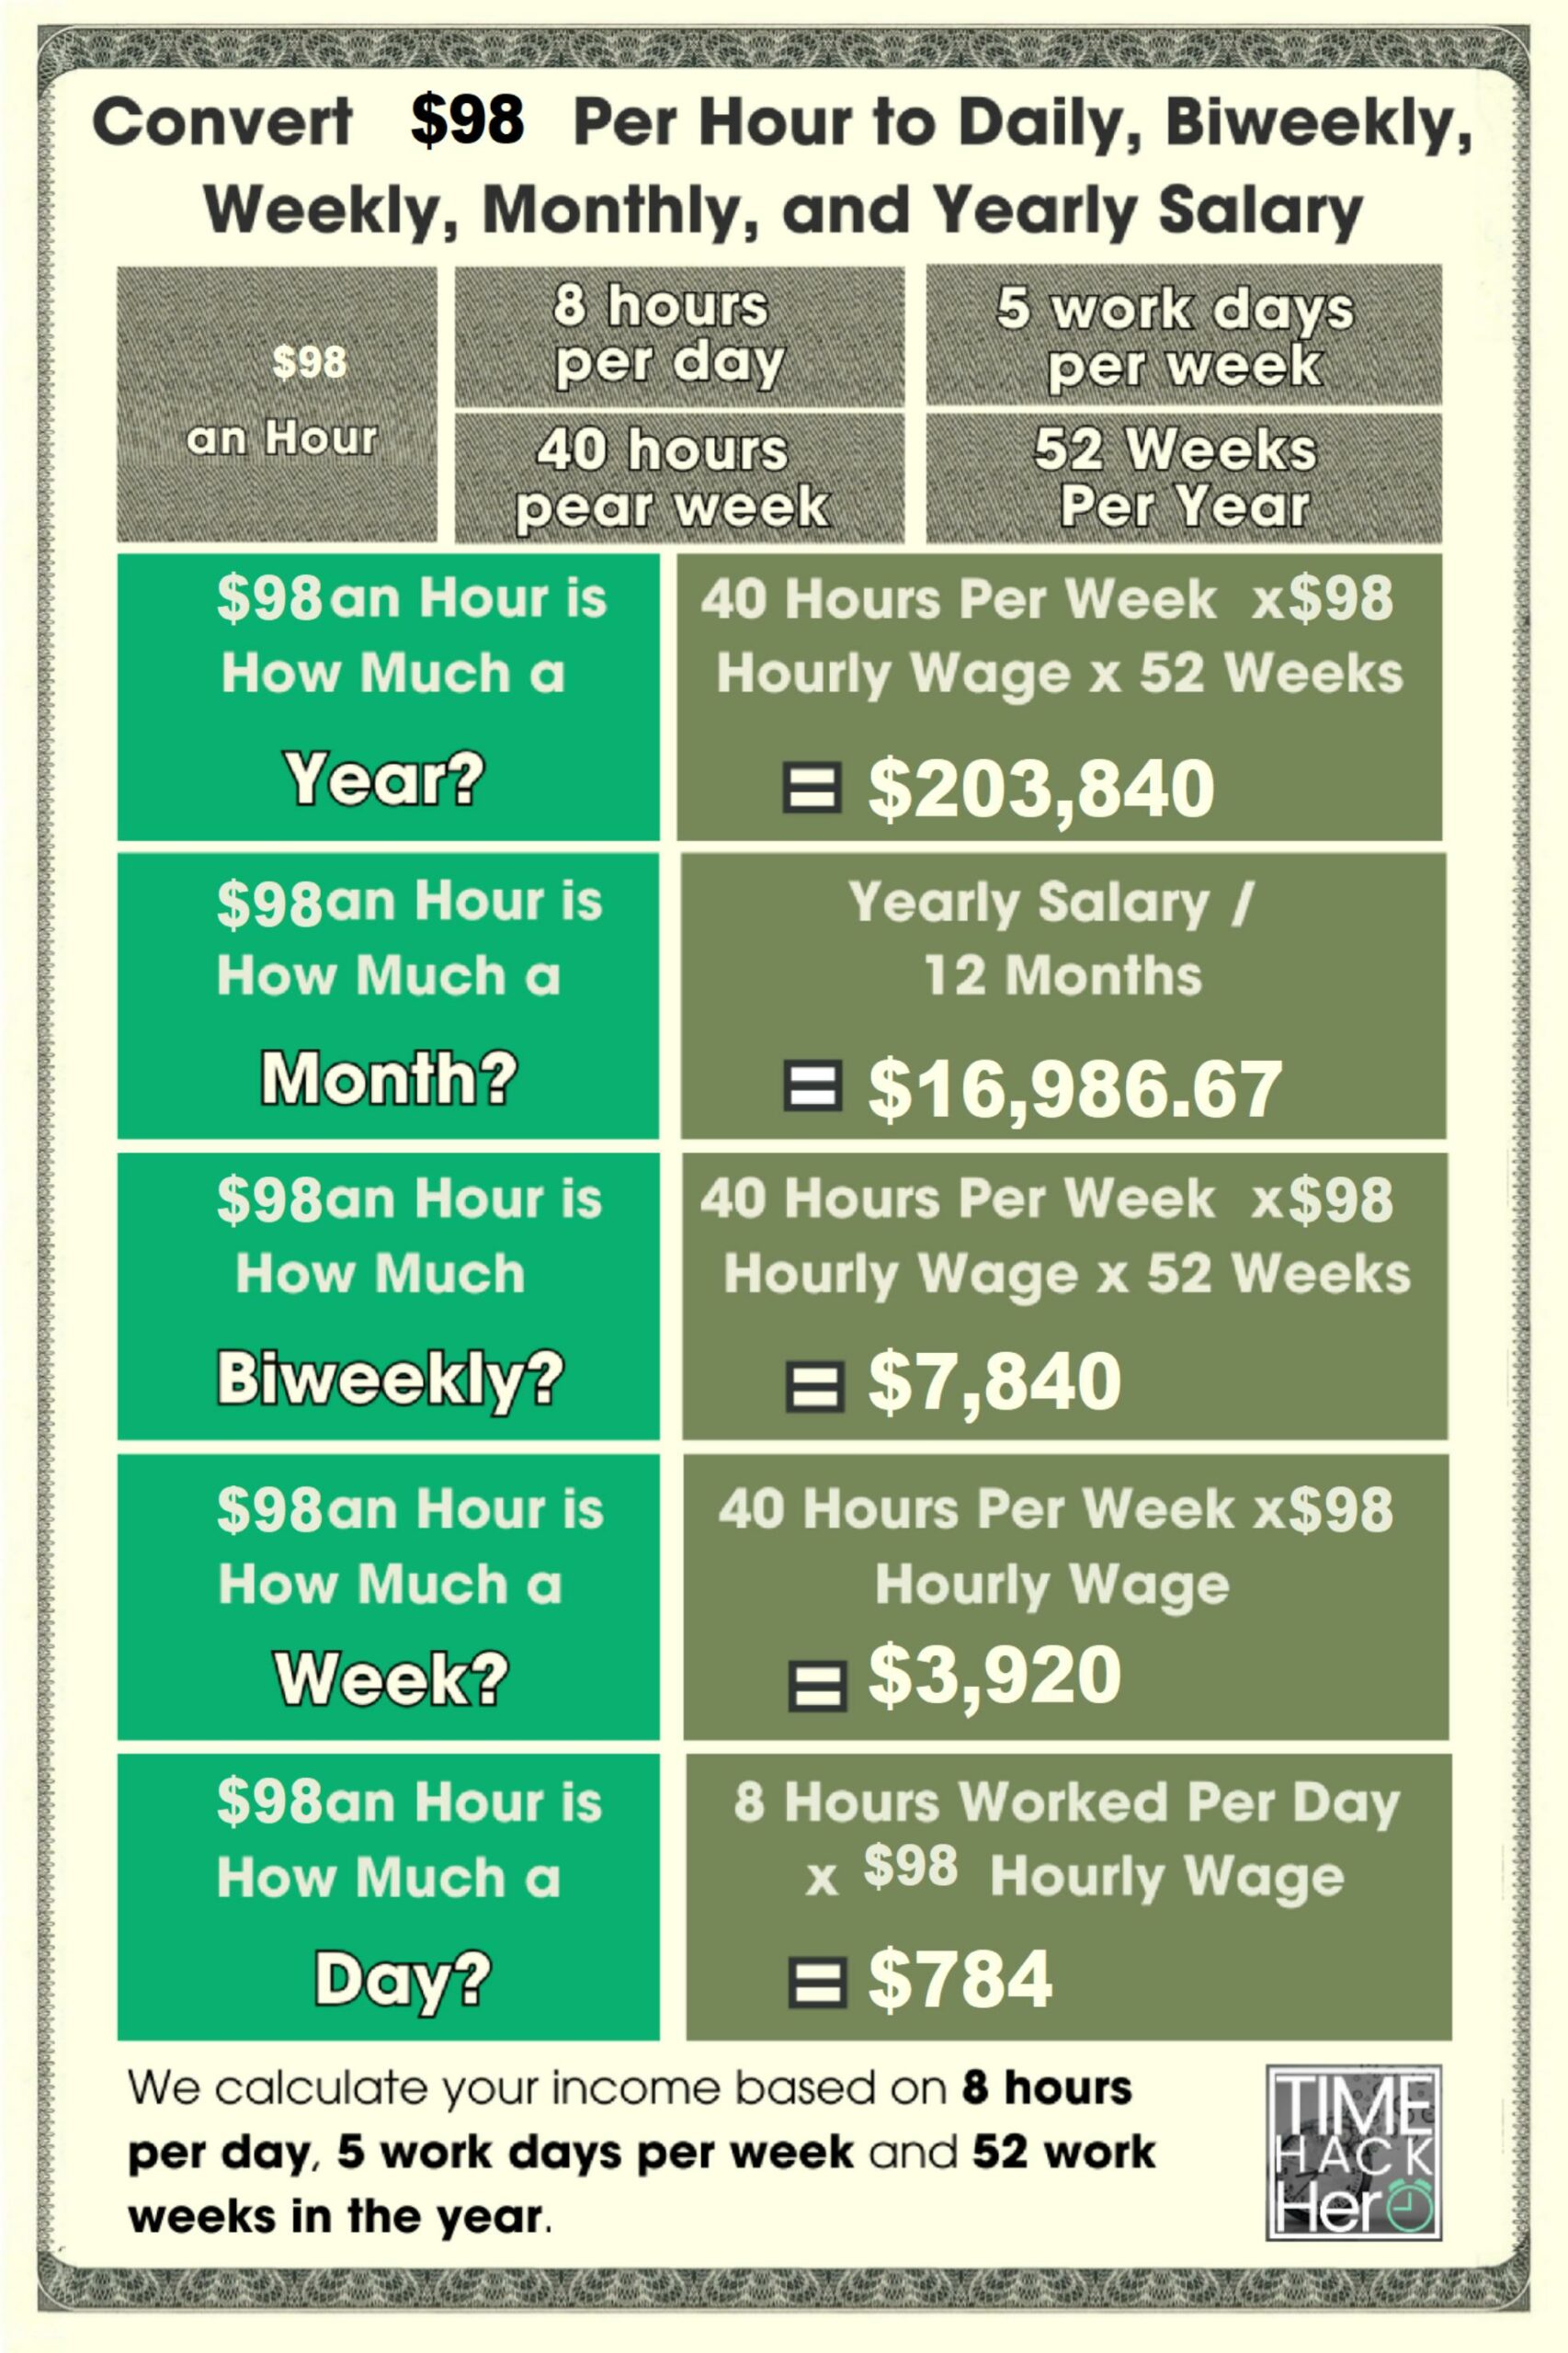 Convert $98 Per Hour to Weekly, Monthly, and Yearly Salary